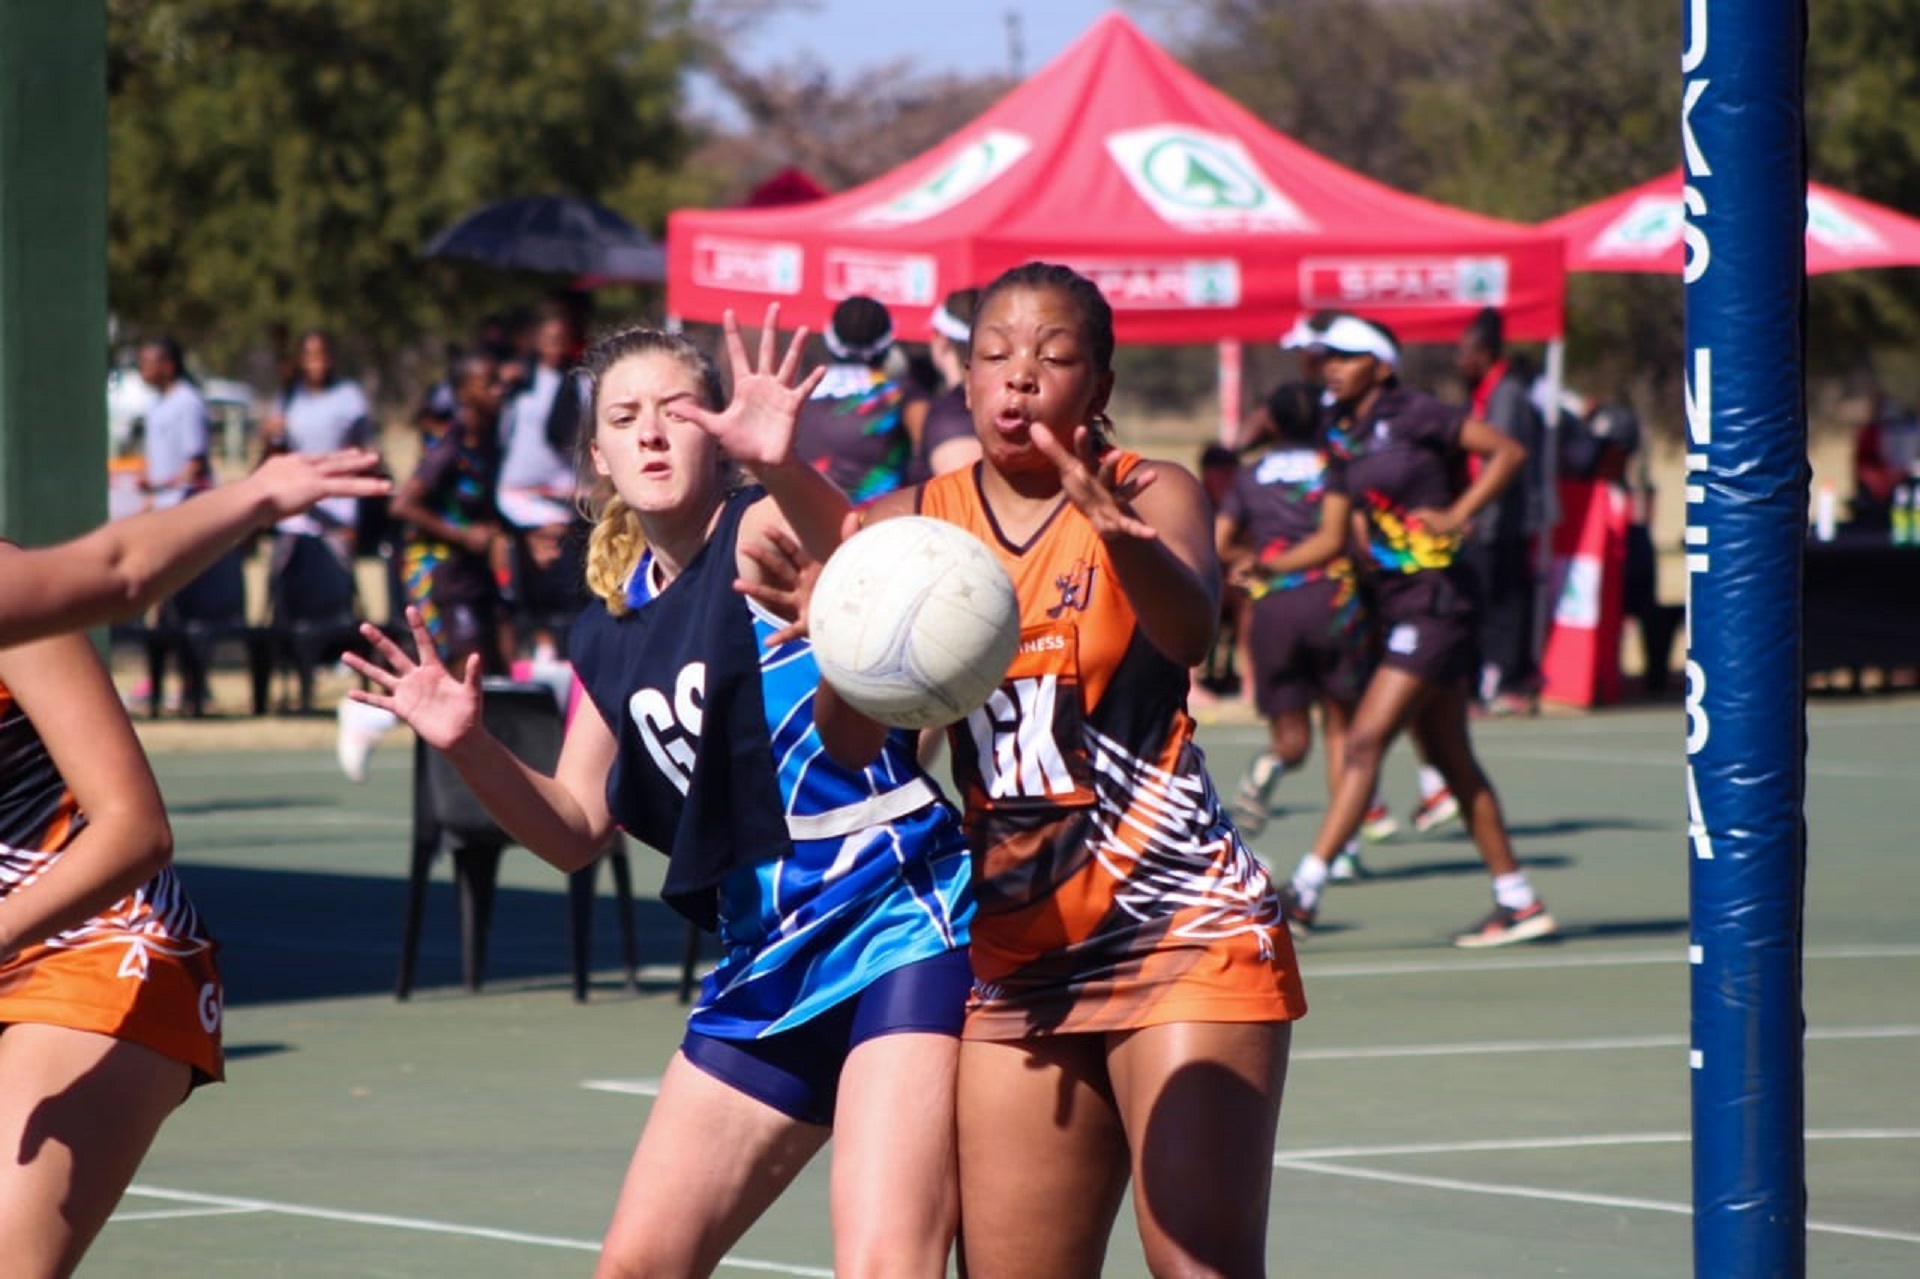 2022 Netball USSA Games: UJ set a record for winning both A and B games with UJ1 and UJ2 netball teams.